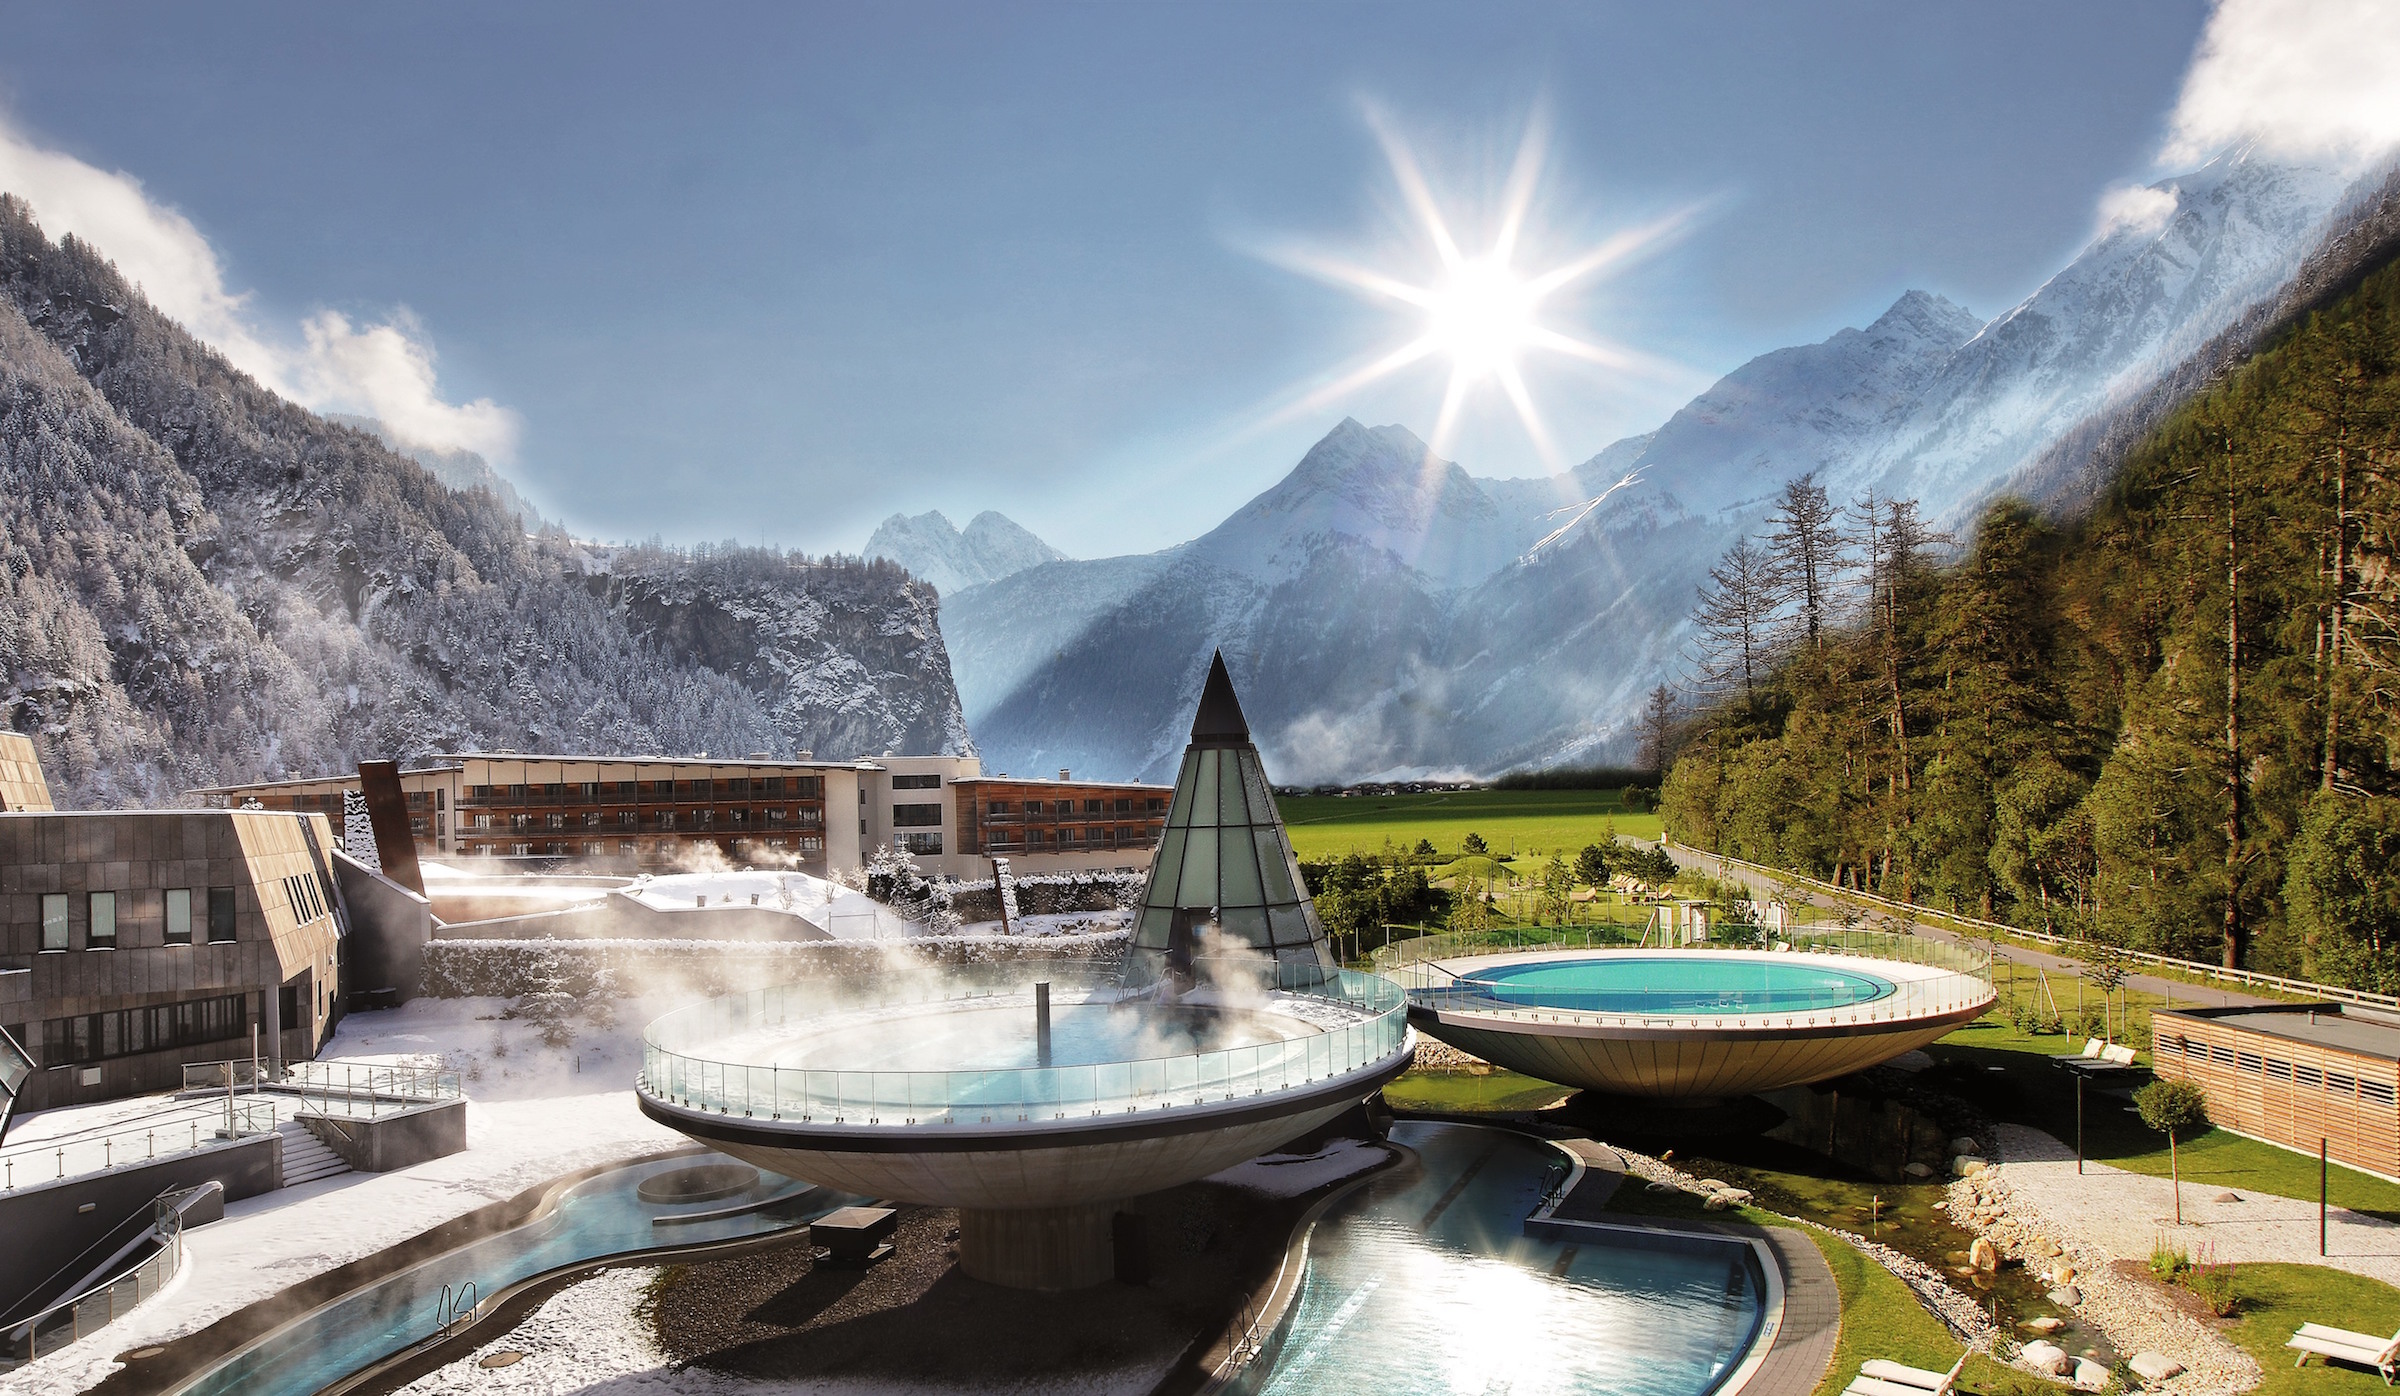 Aquadome, a spa and bathing wonderland, offers many unique Austrian experiences: from Sauna Aufguss to healing wood treatments